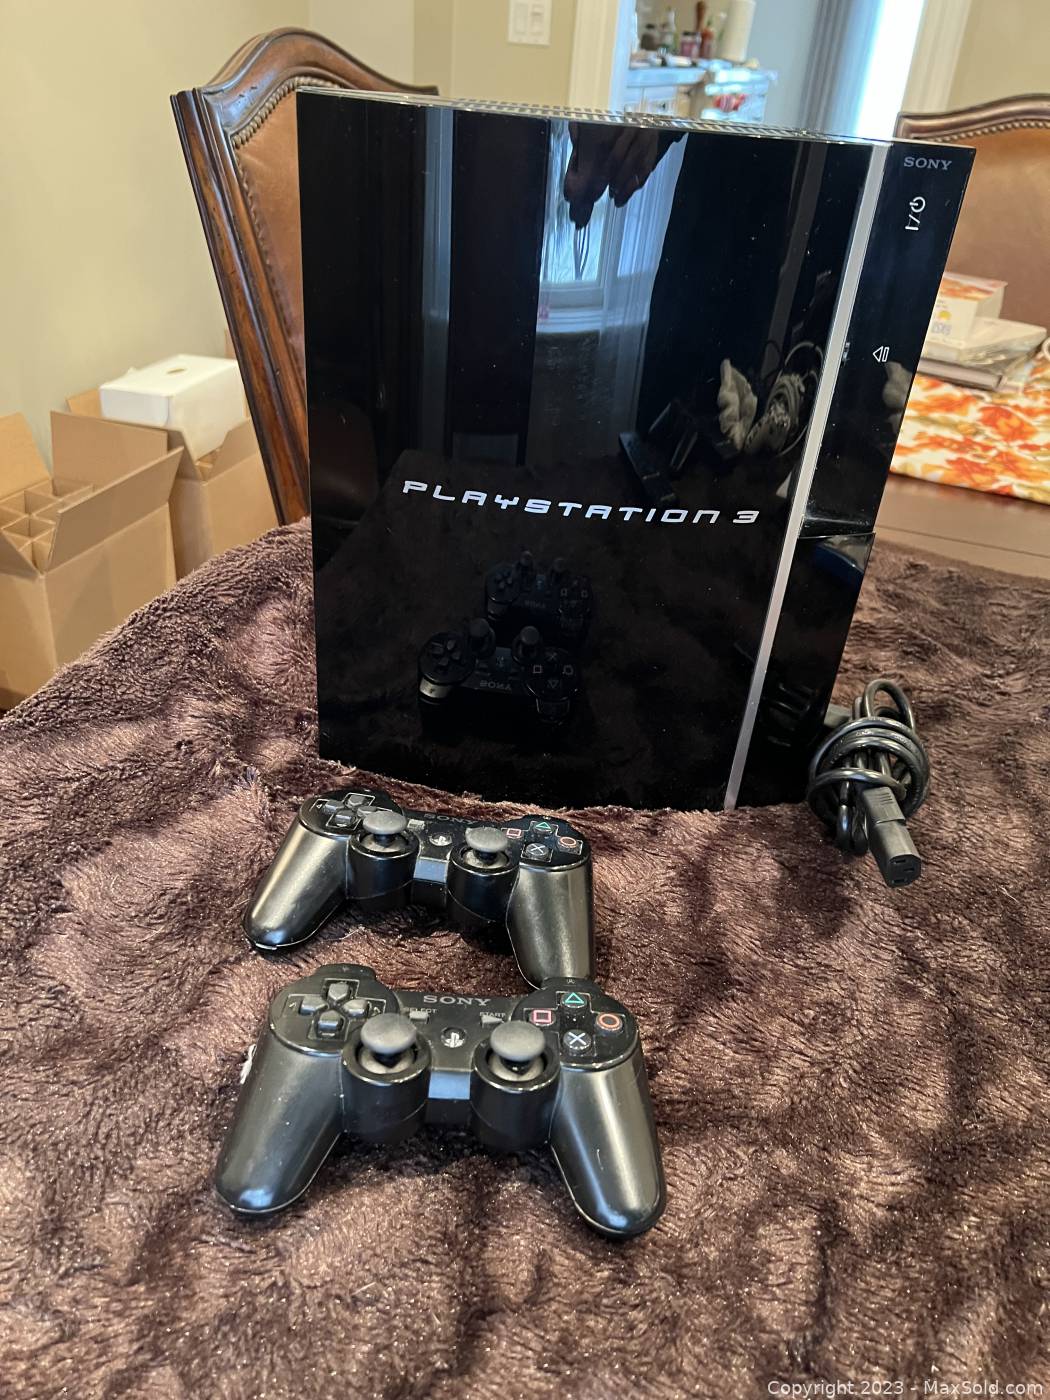 Sony Playstation 3 Model CECHL01 Auction | MaxSold